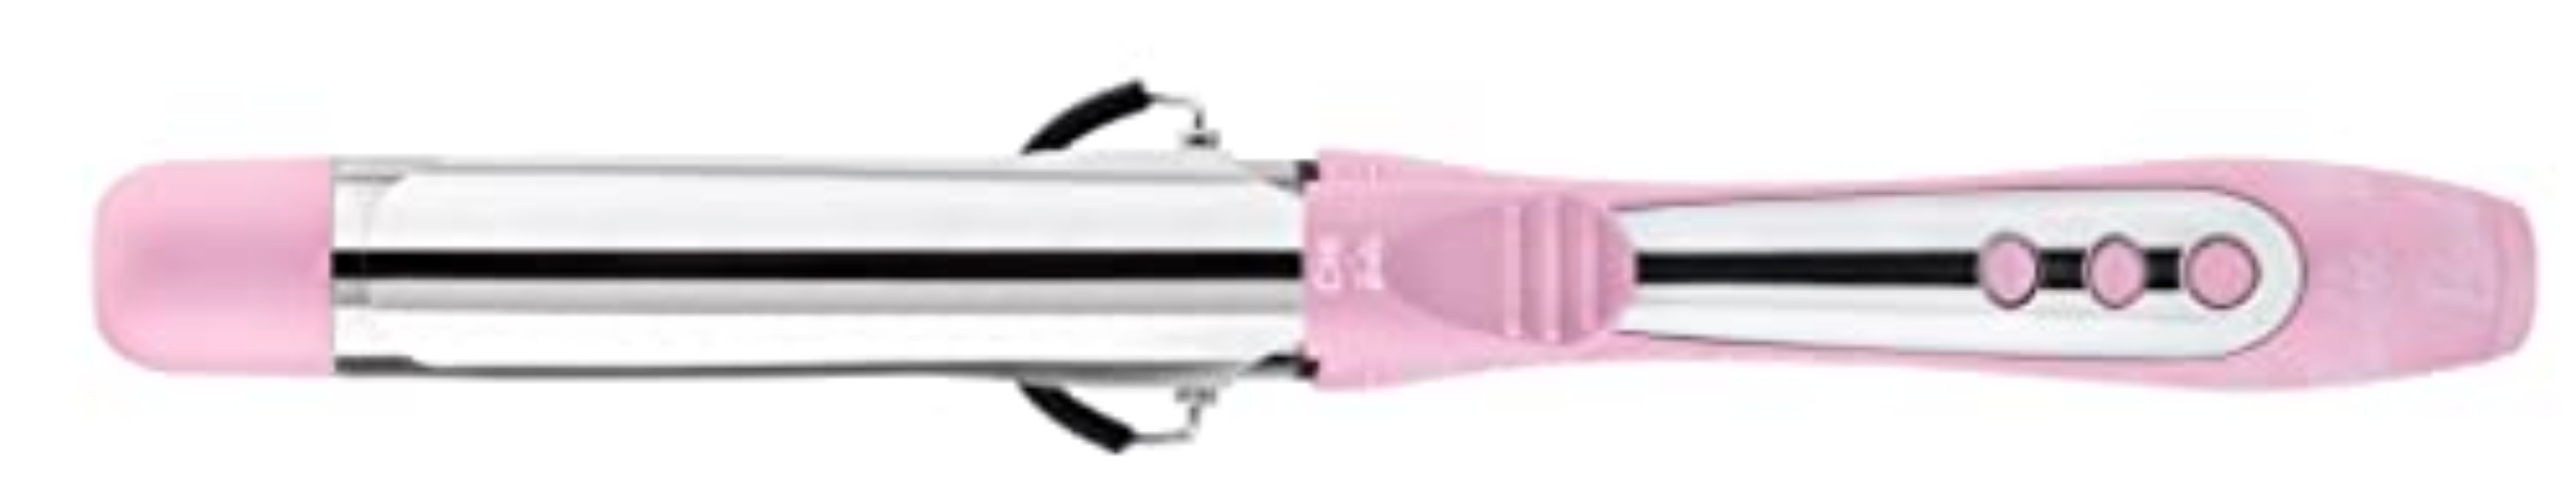 CHI x Barbie Dream Pink Curling Iron, 1.25" - Includes Compact Mirror and Carrying Bag for Perfect Curls Wherever You Go